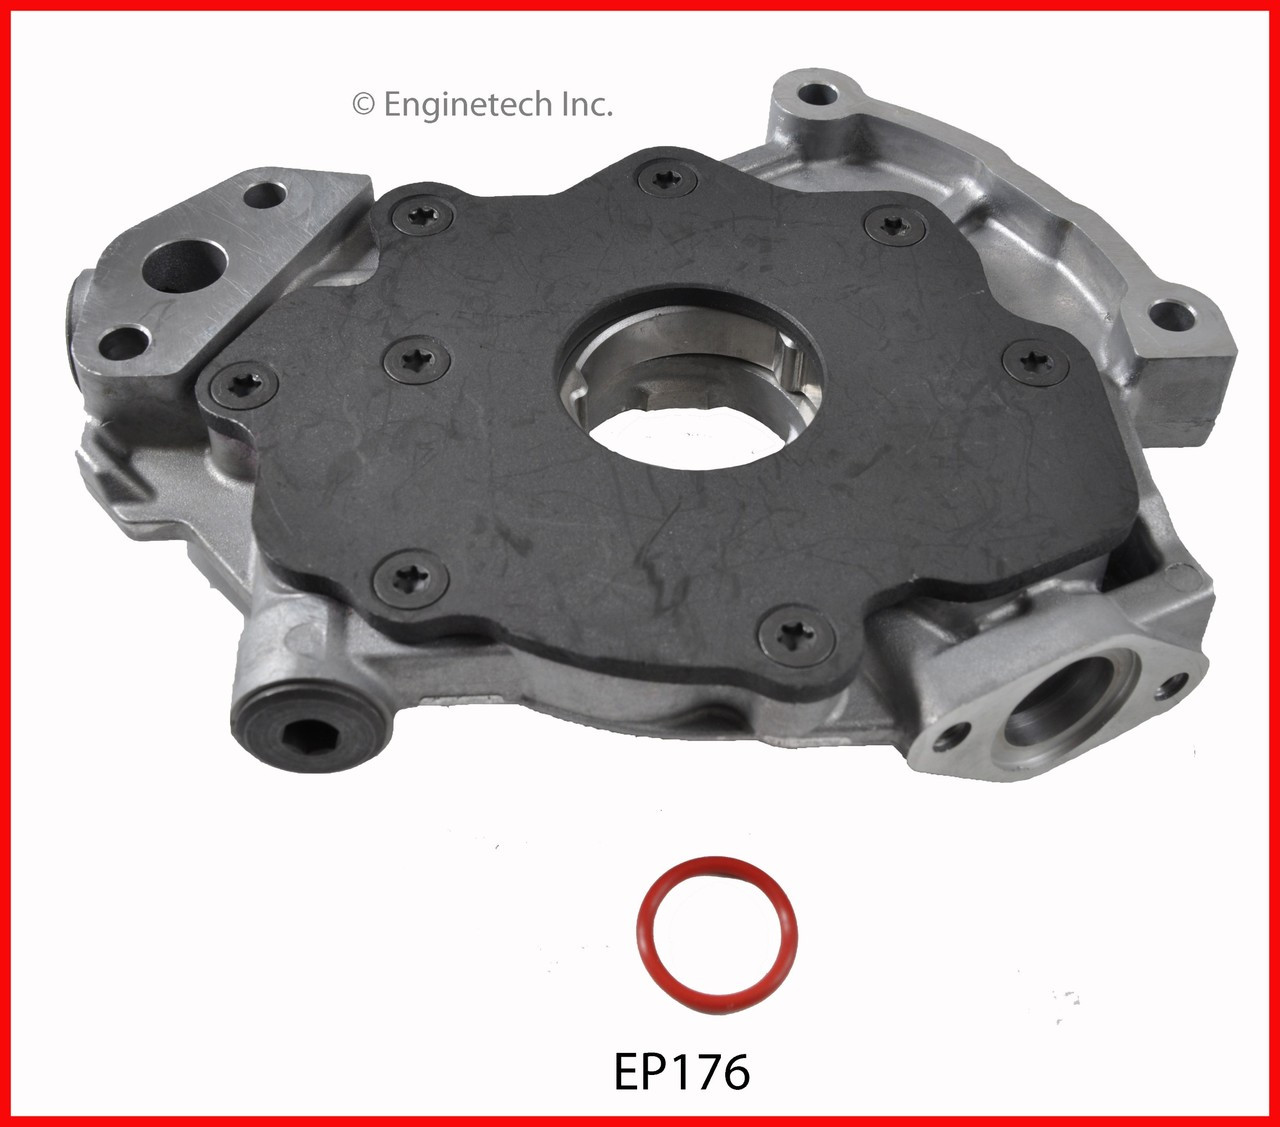 Oil Pump - 2004 Ford Expedition 4.6L (EP176.K211)